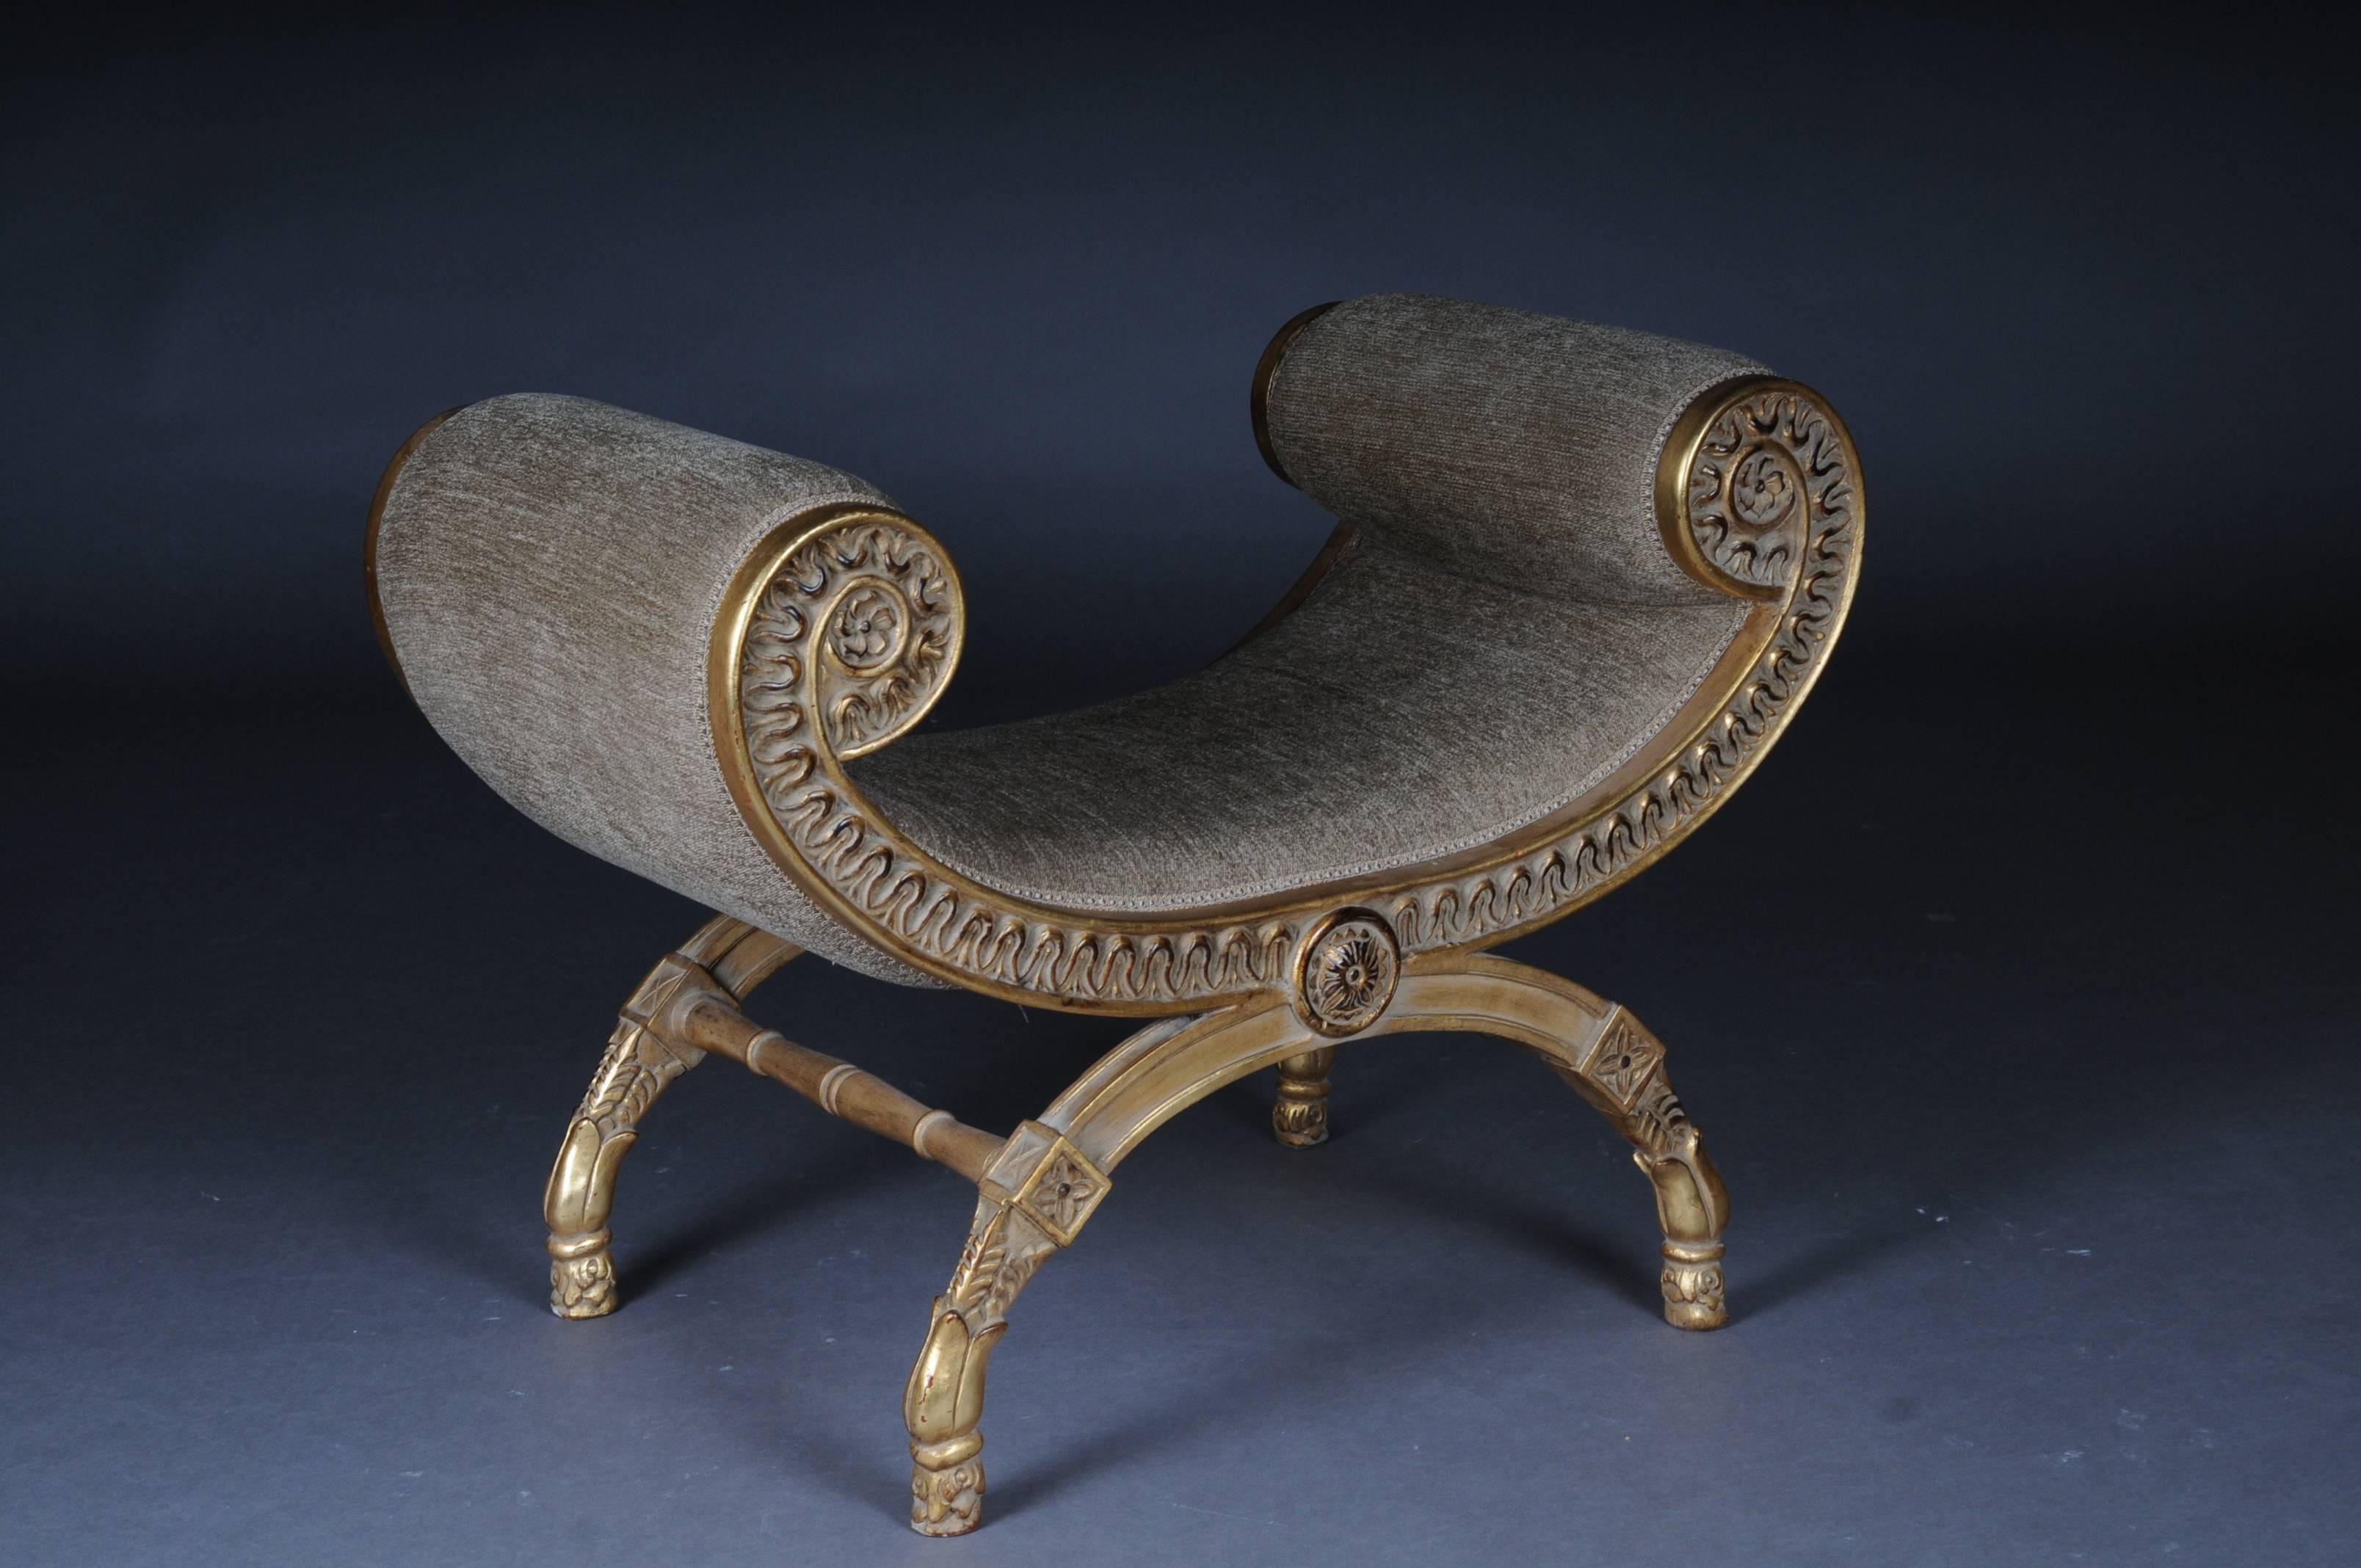 Solid beechwood, finely carved and set. Armrests ending in scrolled volutes. Semicircular frame on four scissor-shaped legs. Below connected by appropriately curly, strongly profiled webs. The seat is finished with a historical, Classic upholstery.